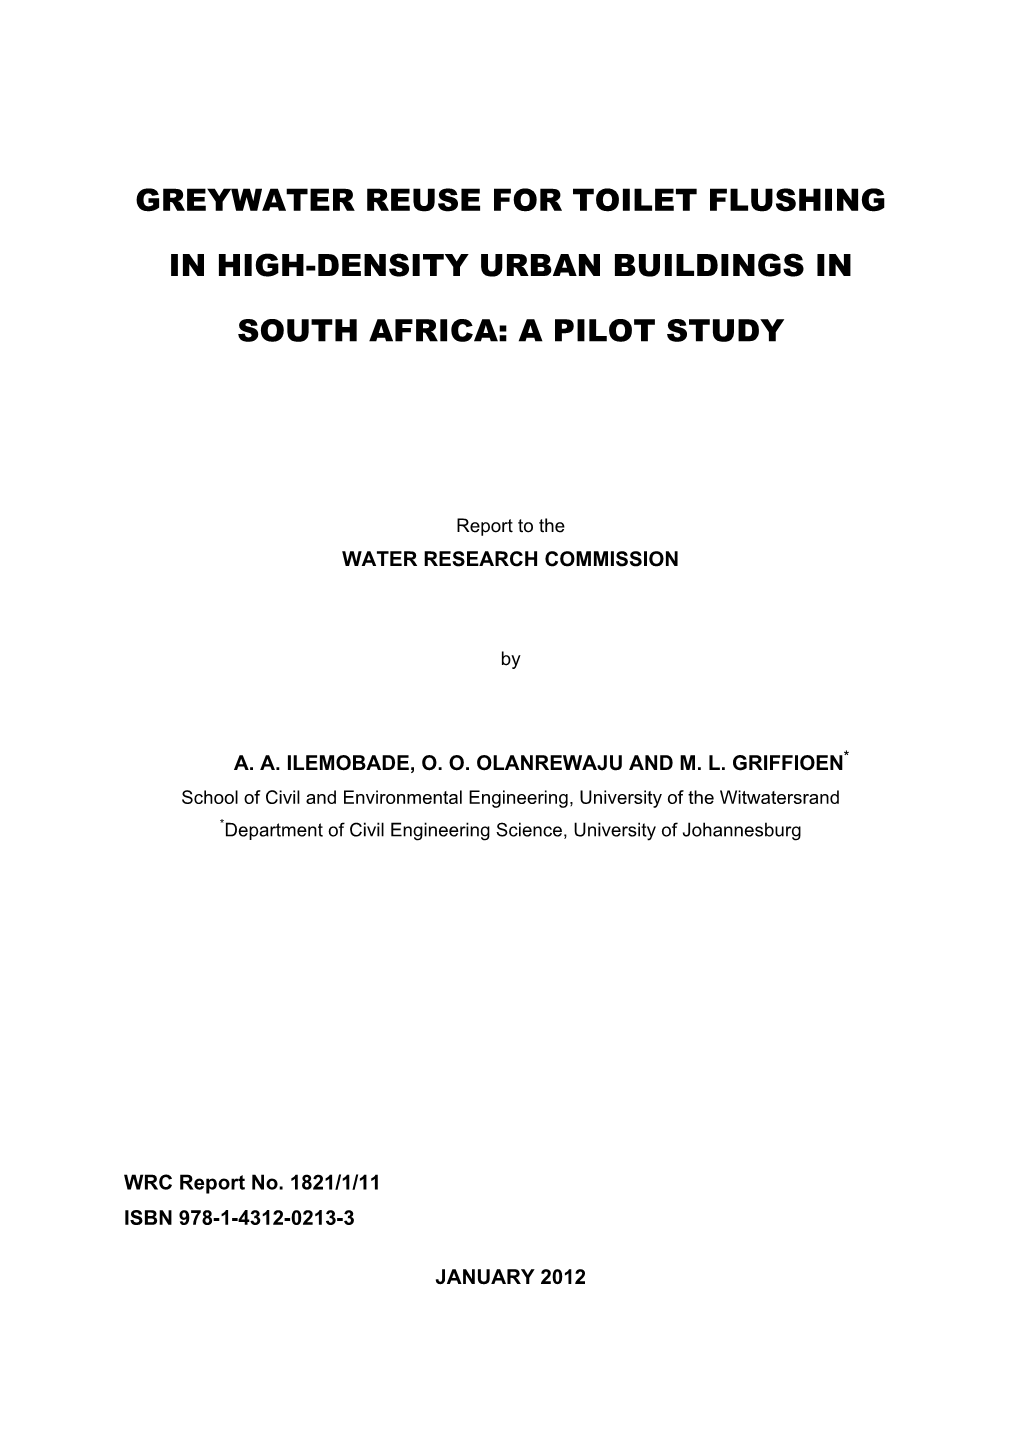 Greywater Reuse for Toilet Flushing in High-Density Urban Buildings in South Africa: a Pilot Study